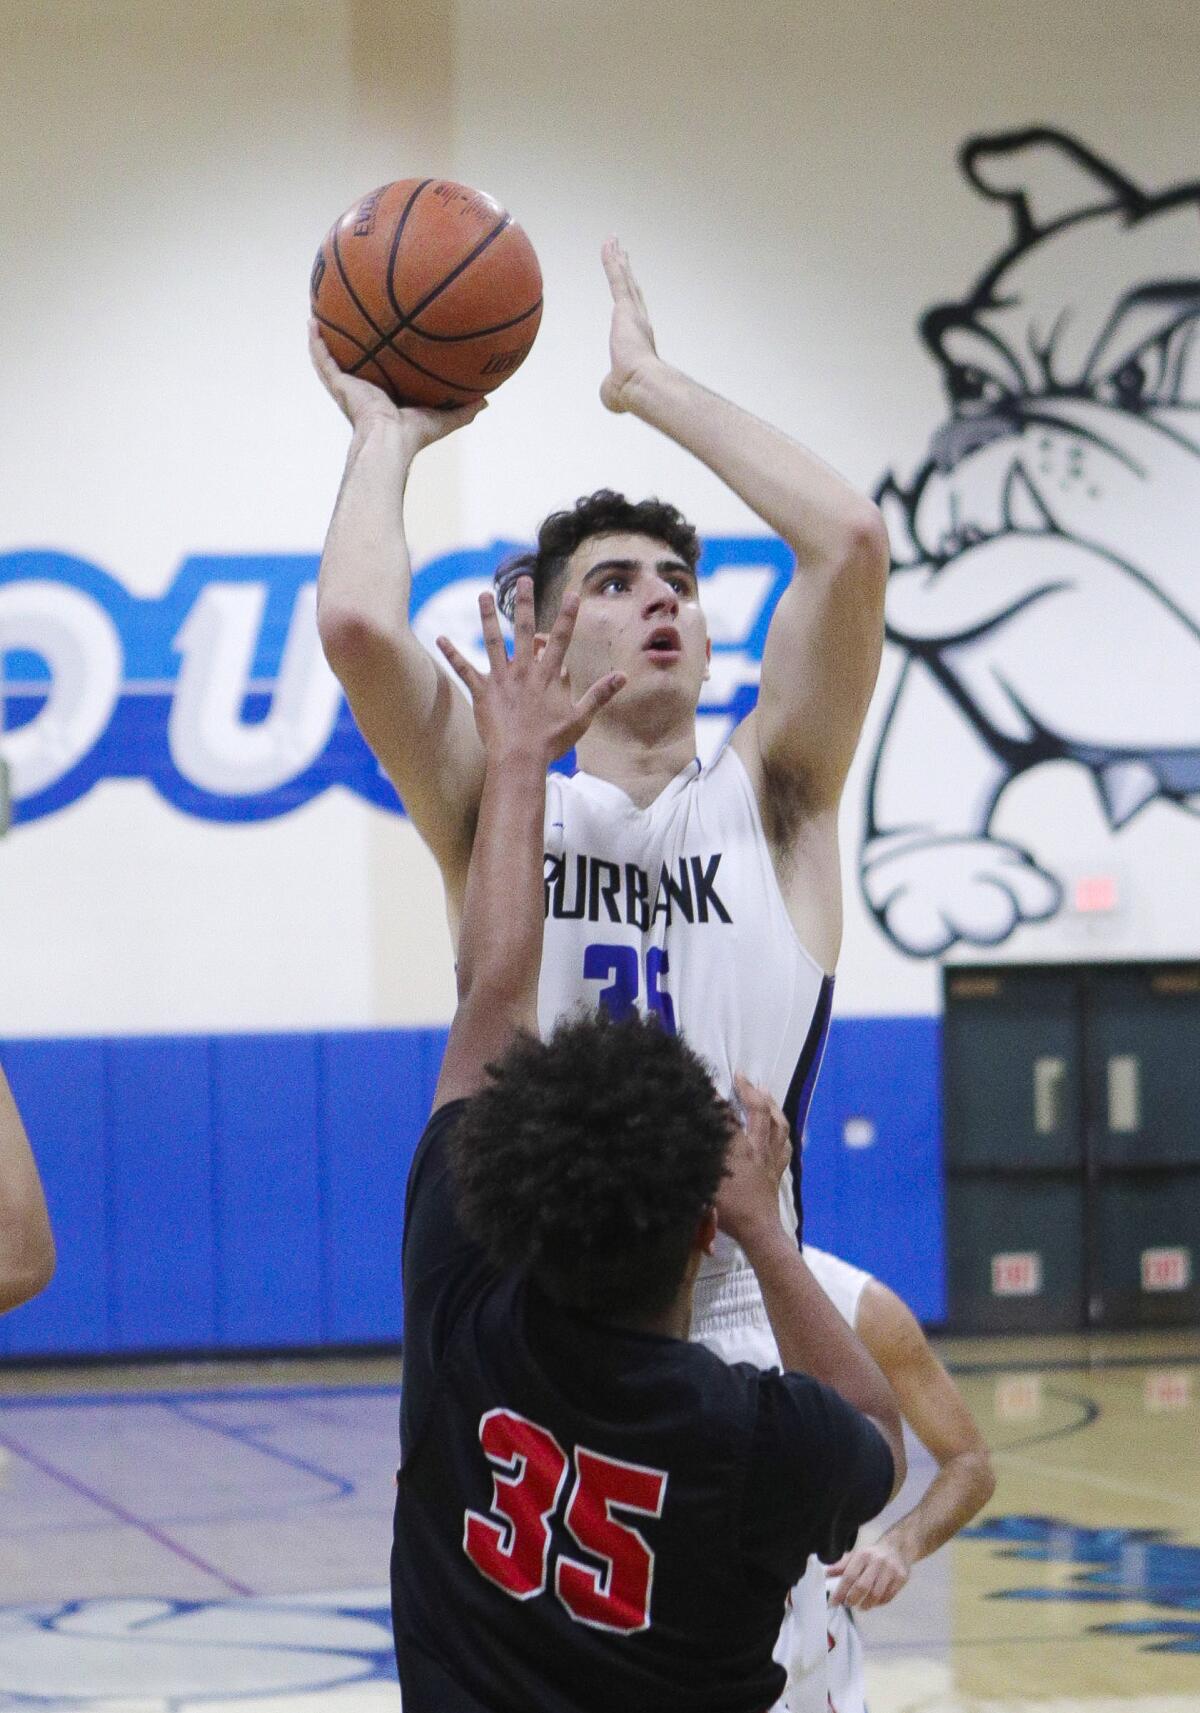 Burbank's Kevin Sarkes shoots over Glendale's Eric Torossian in a Pacific League boys' basketball game at Burbank High School on Friday, January 17, 2020.